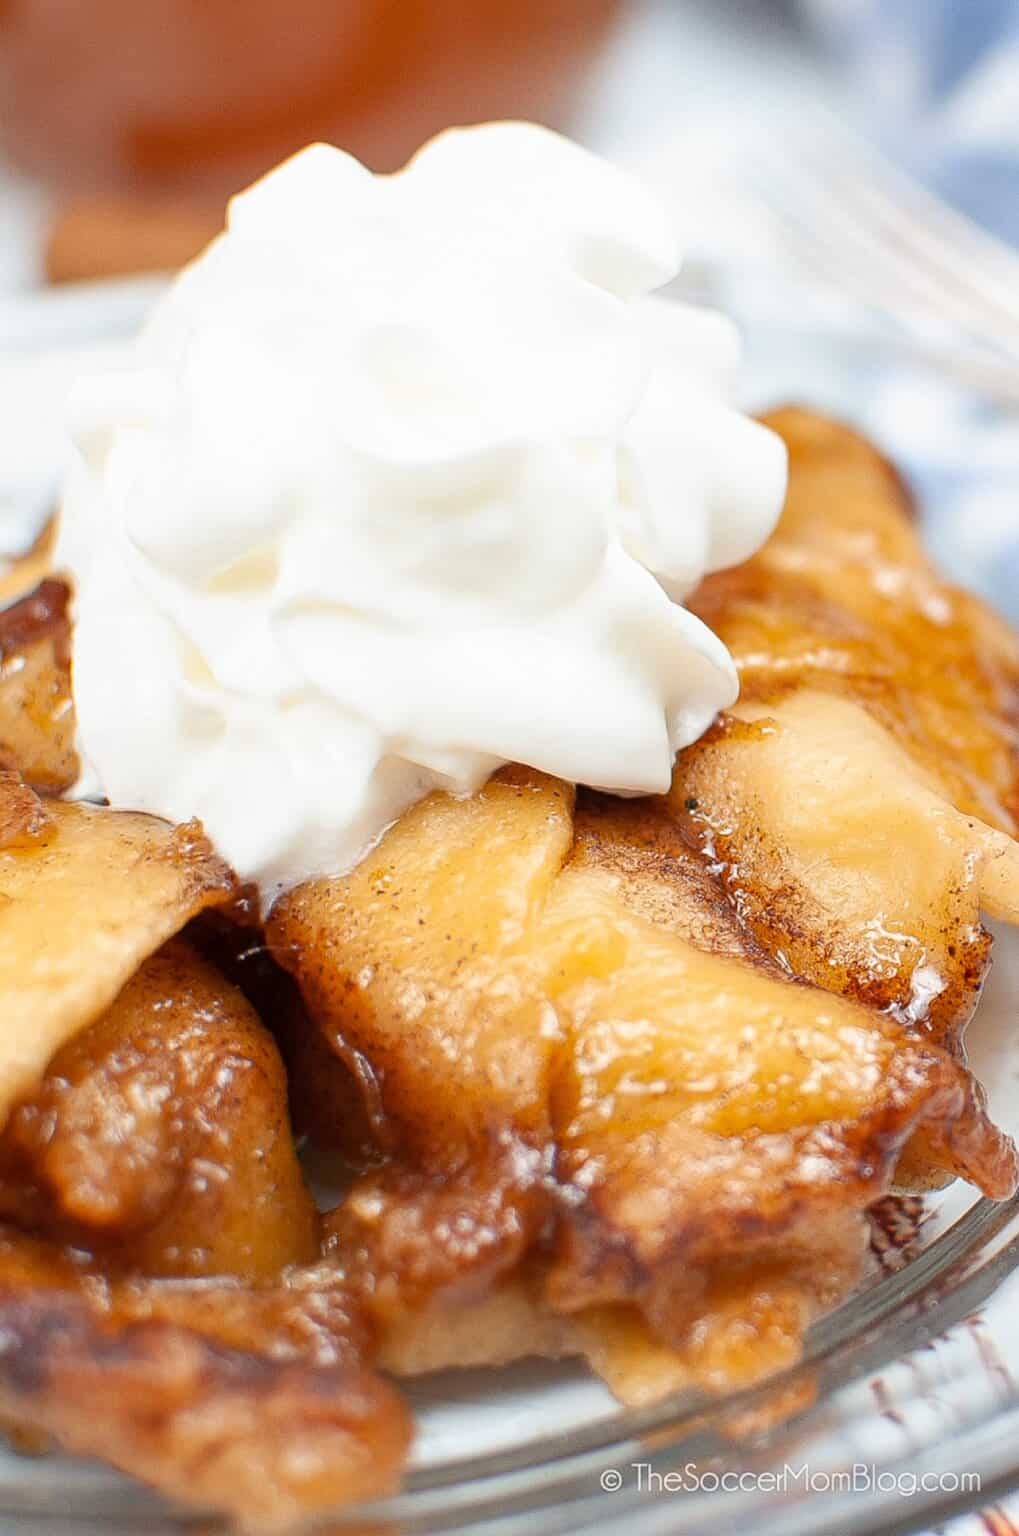 Instant Pot Apple Dumplings with whipped cream topping.
